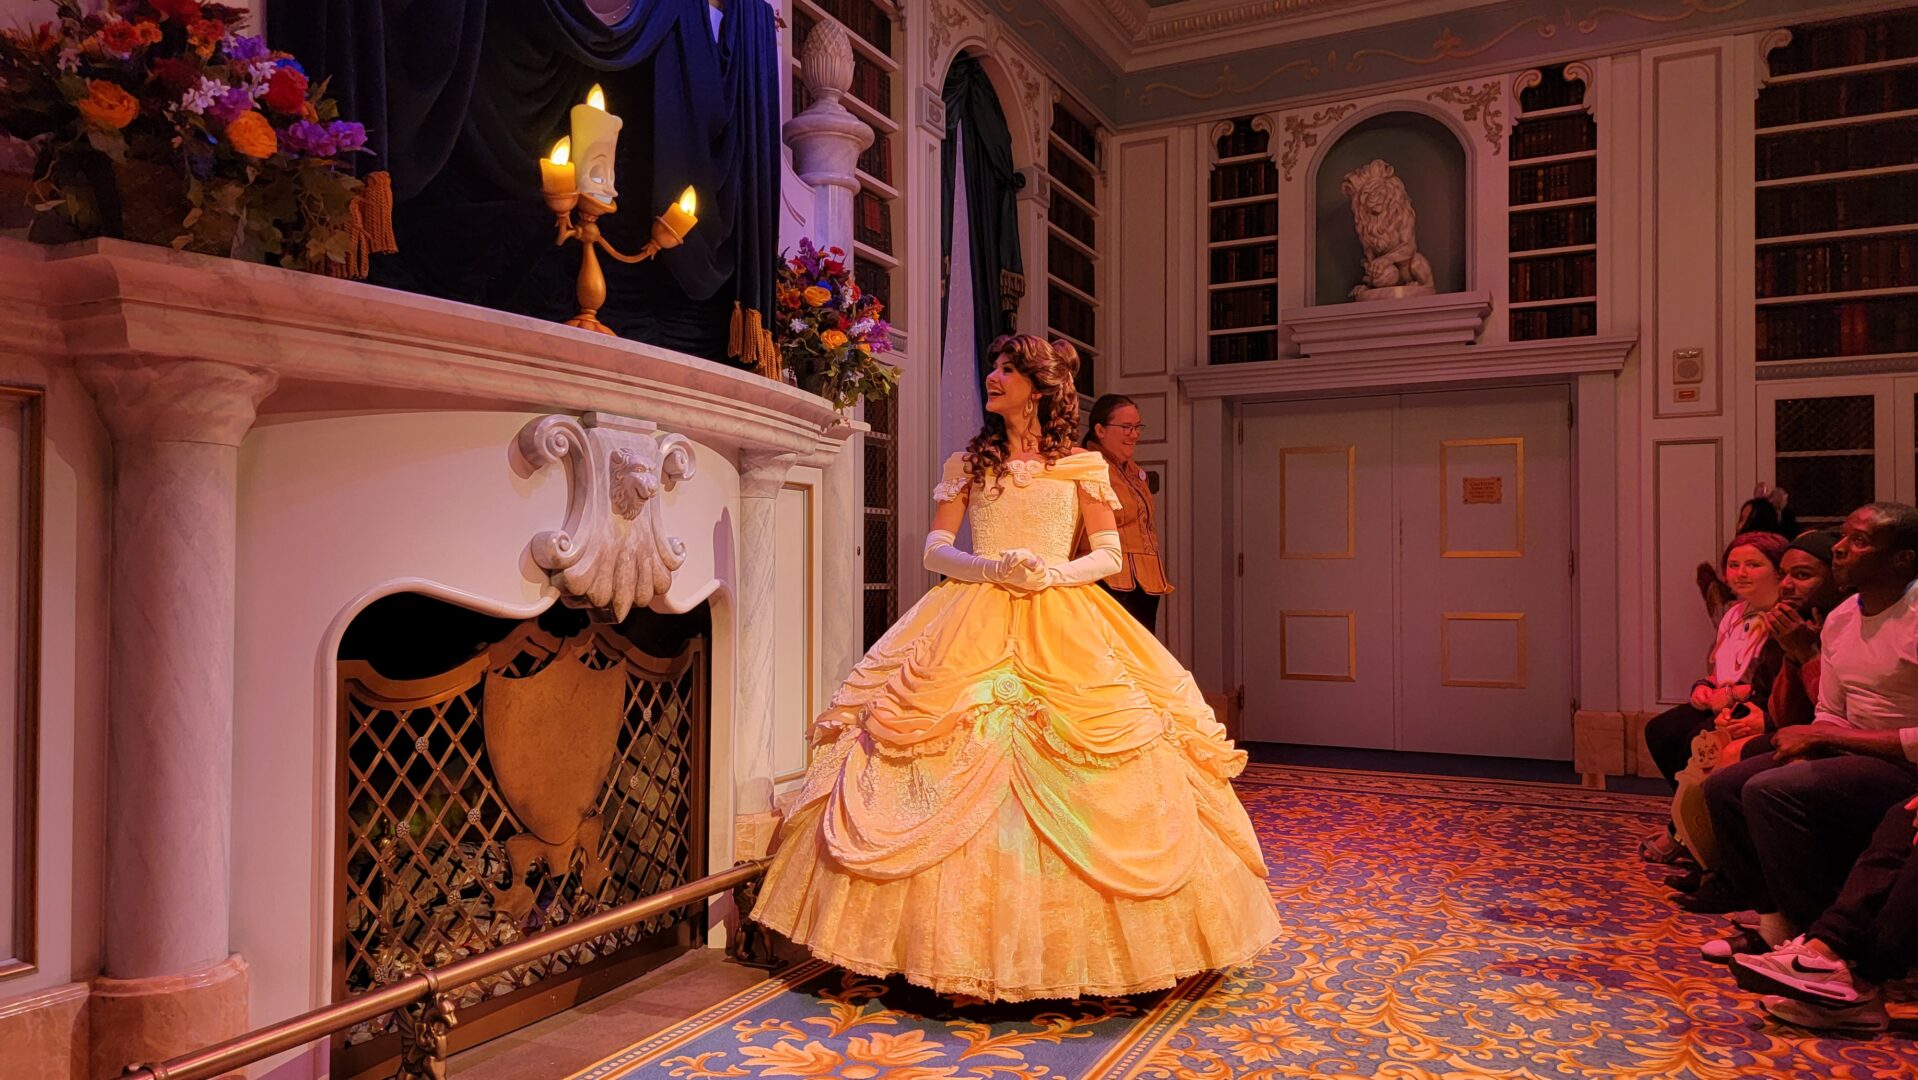 Belle Returns to Enchanted Tales in the Magic Kingdom and we got a Sneak Preview